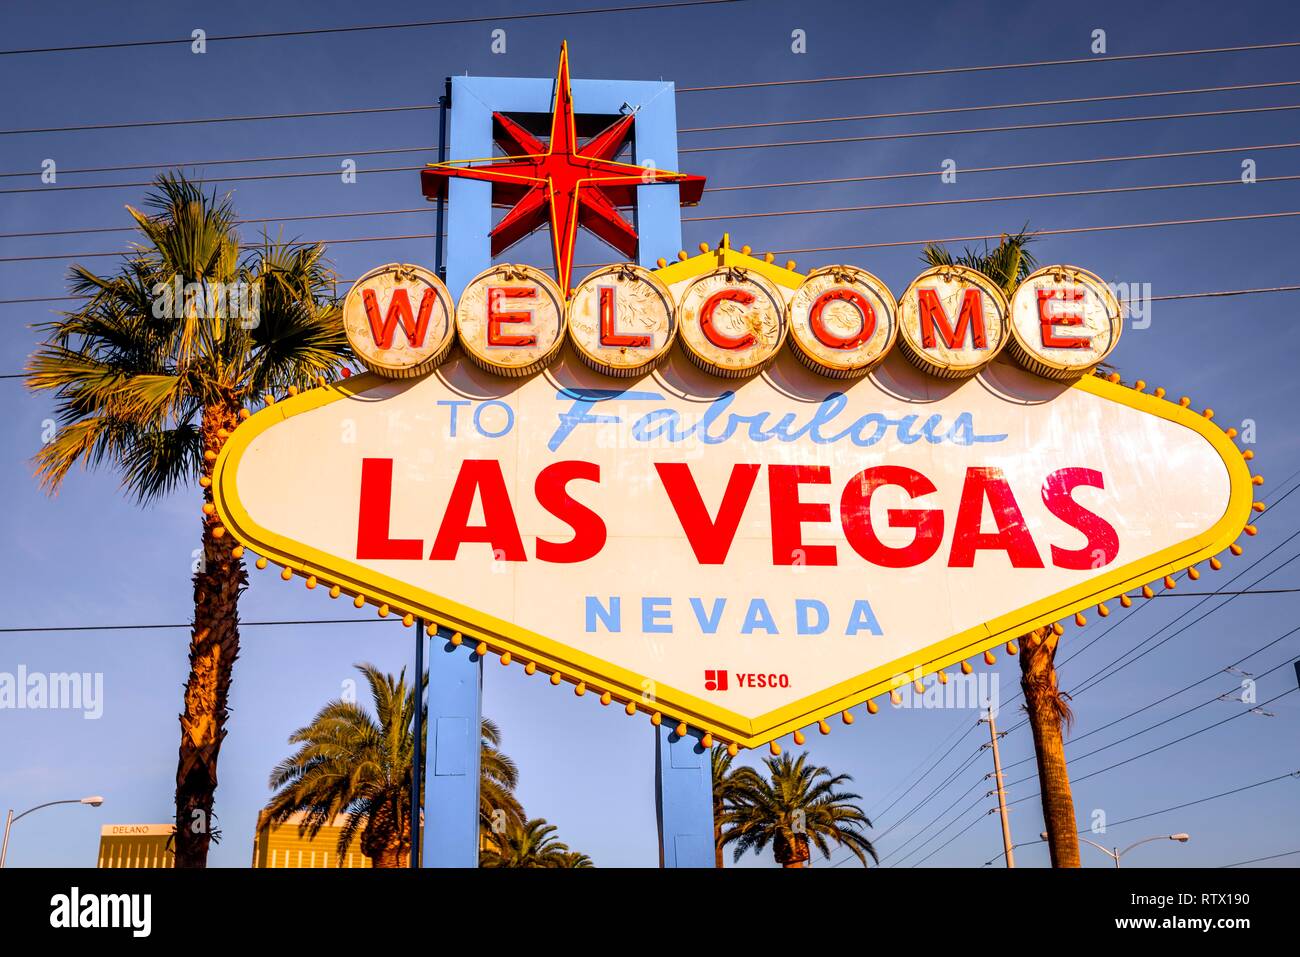 Welcome to Fabulous Las Vegas, front of the Las Vegas Welcome sign, Las Vegas Strip, Las Vegas, Nevada, USA Stock Photo